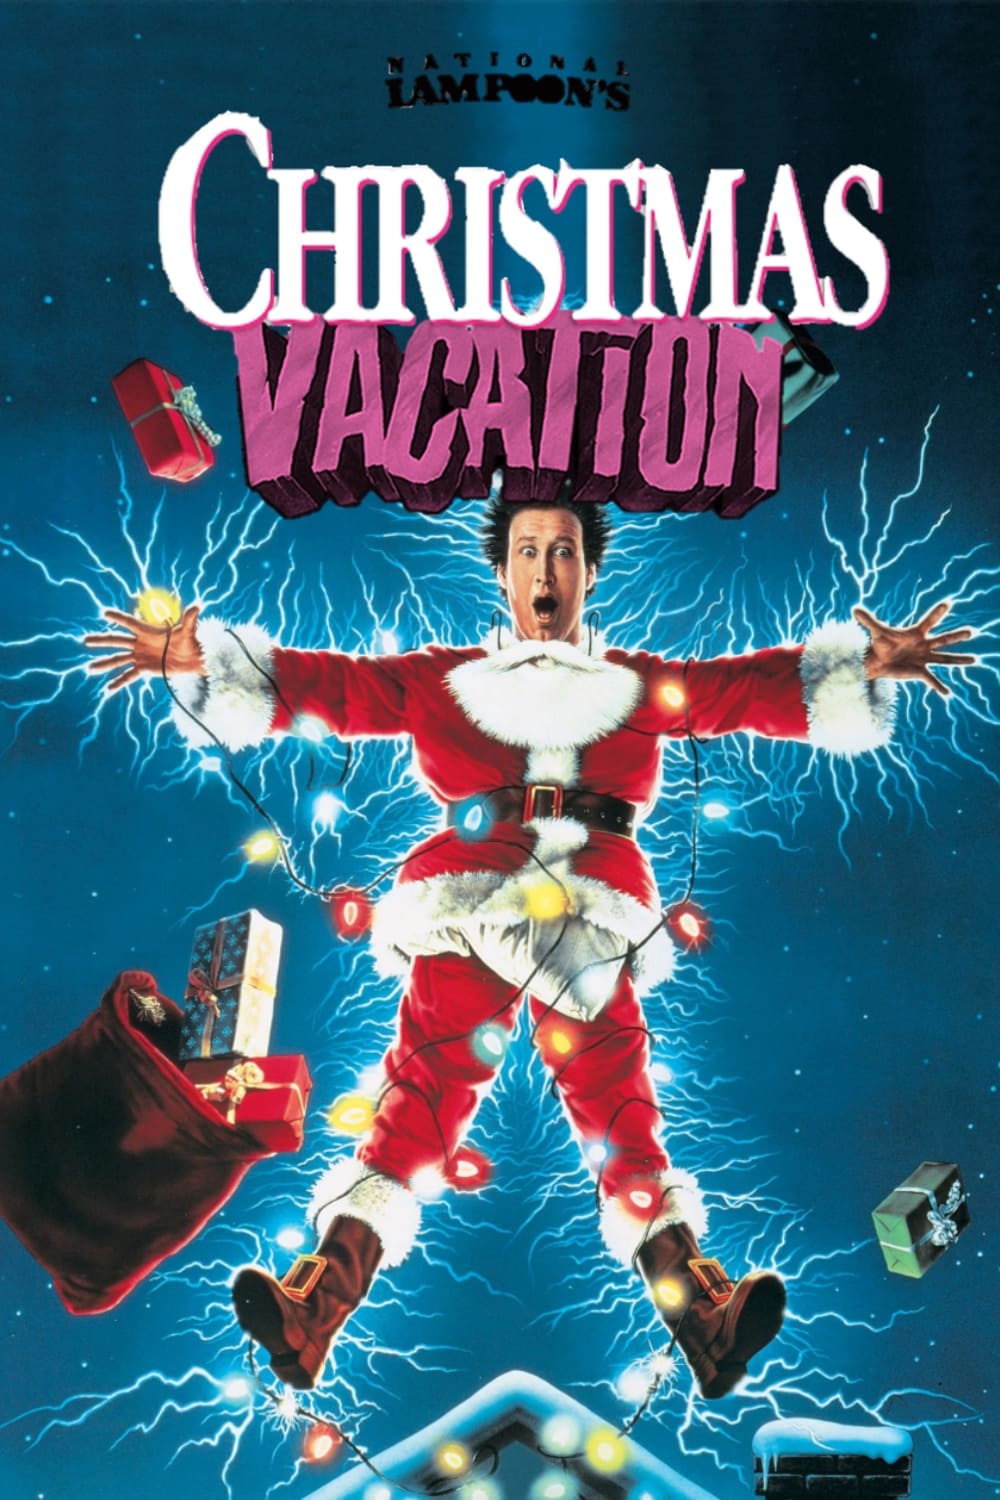 National Lampoon’s Christmas Vacation (1989)